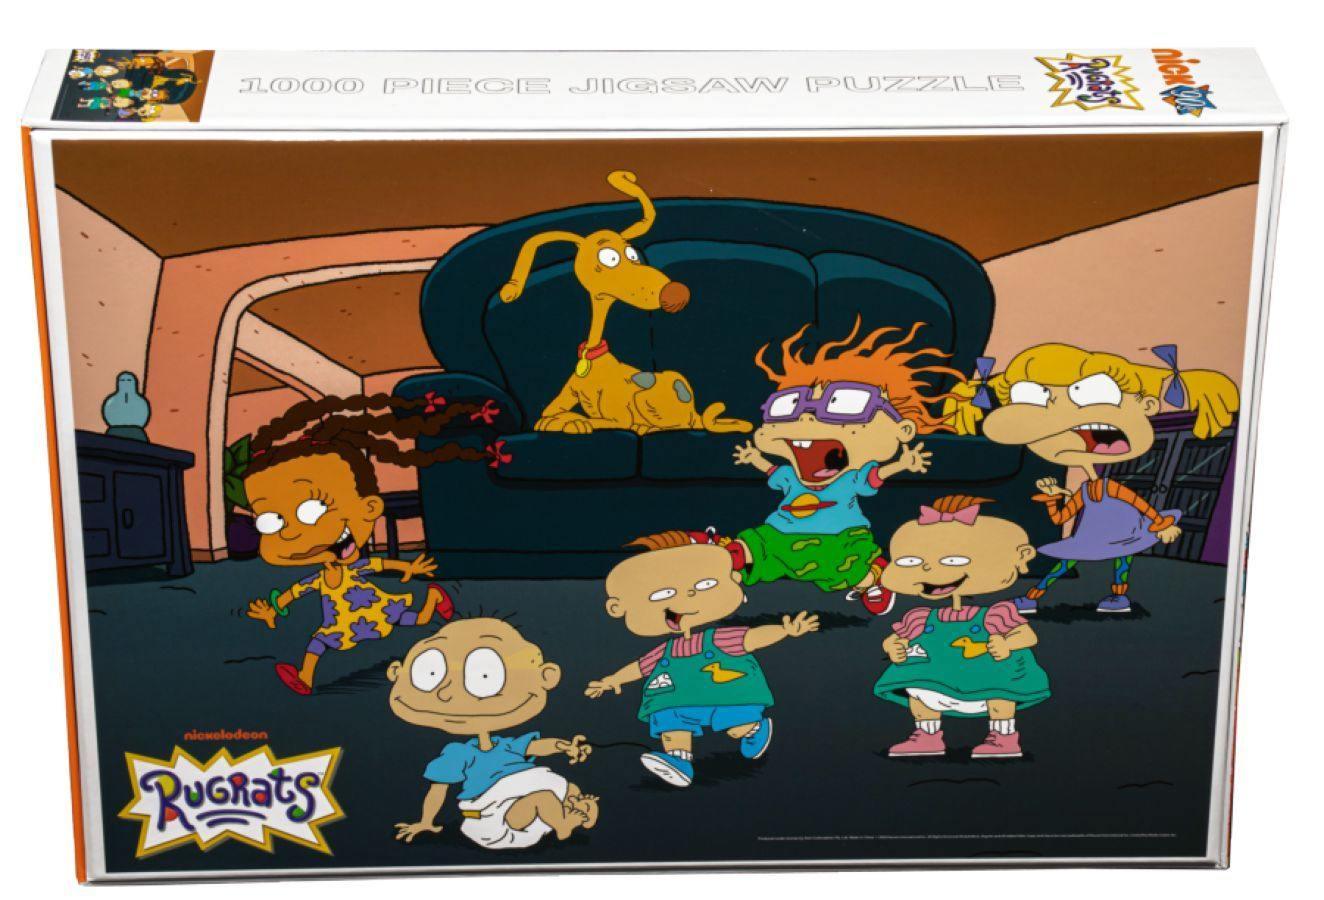 IKO1814 Rugrats - Lounge Room 1000 piece Jigsaw Puzzle - Ikon Collectables - Titan Pop Culture